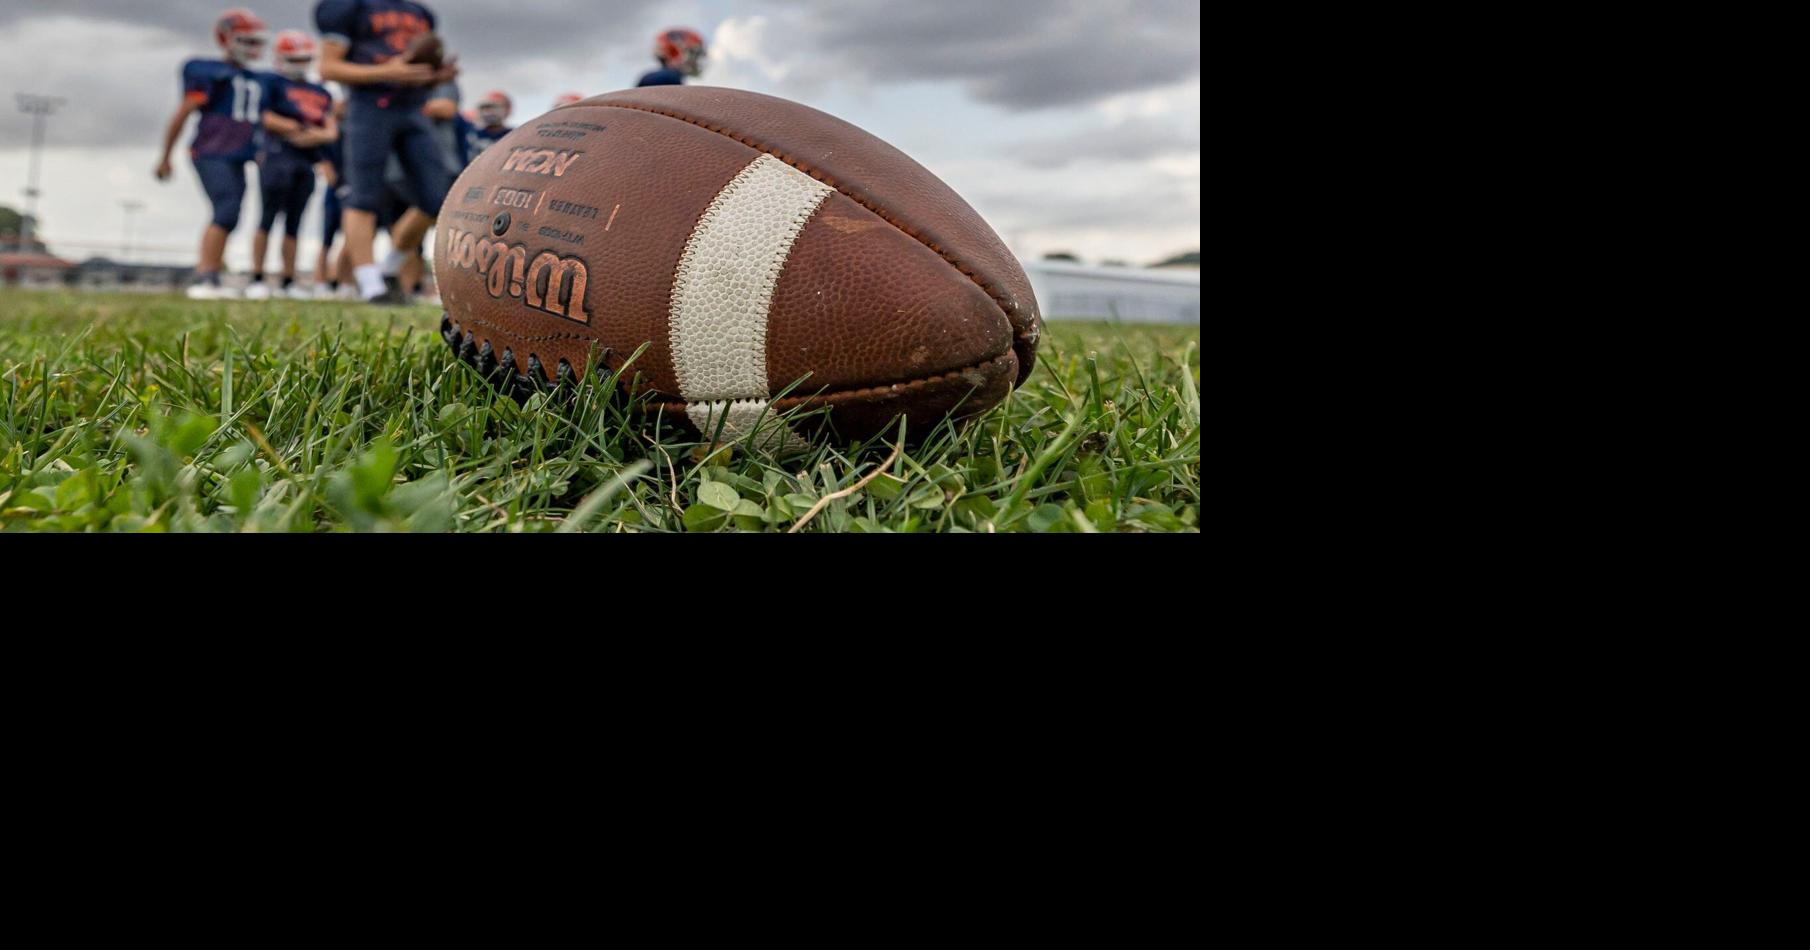 Live Week 8 score updates from throughout the Central Illinois area